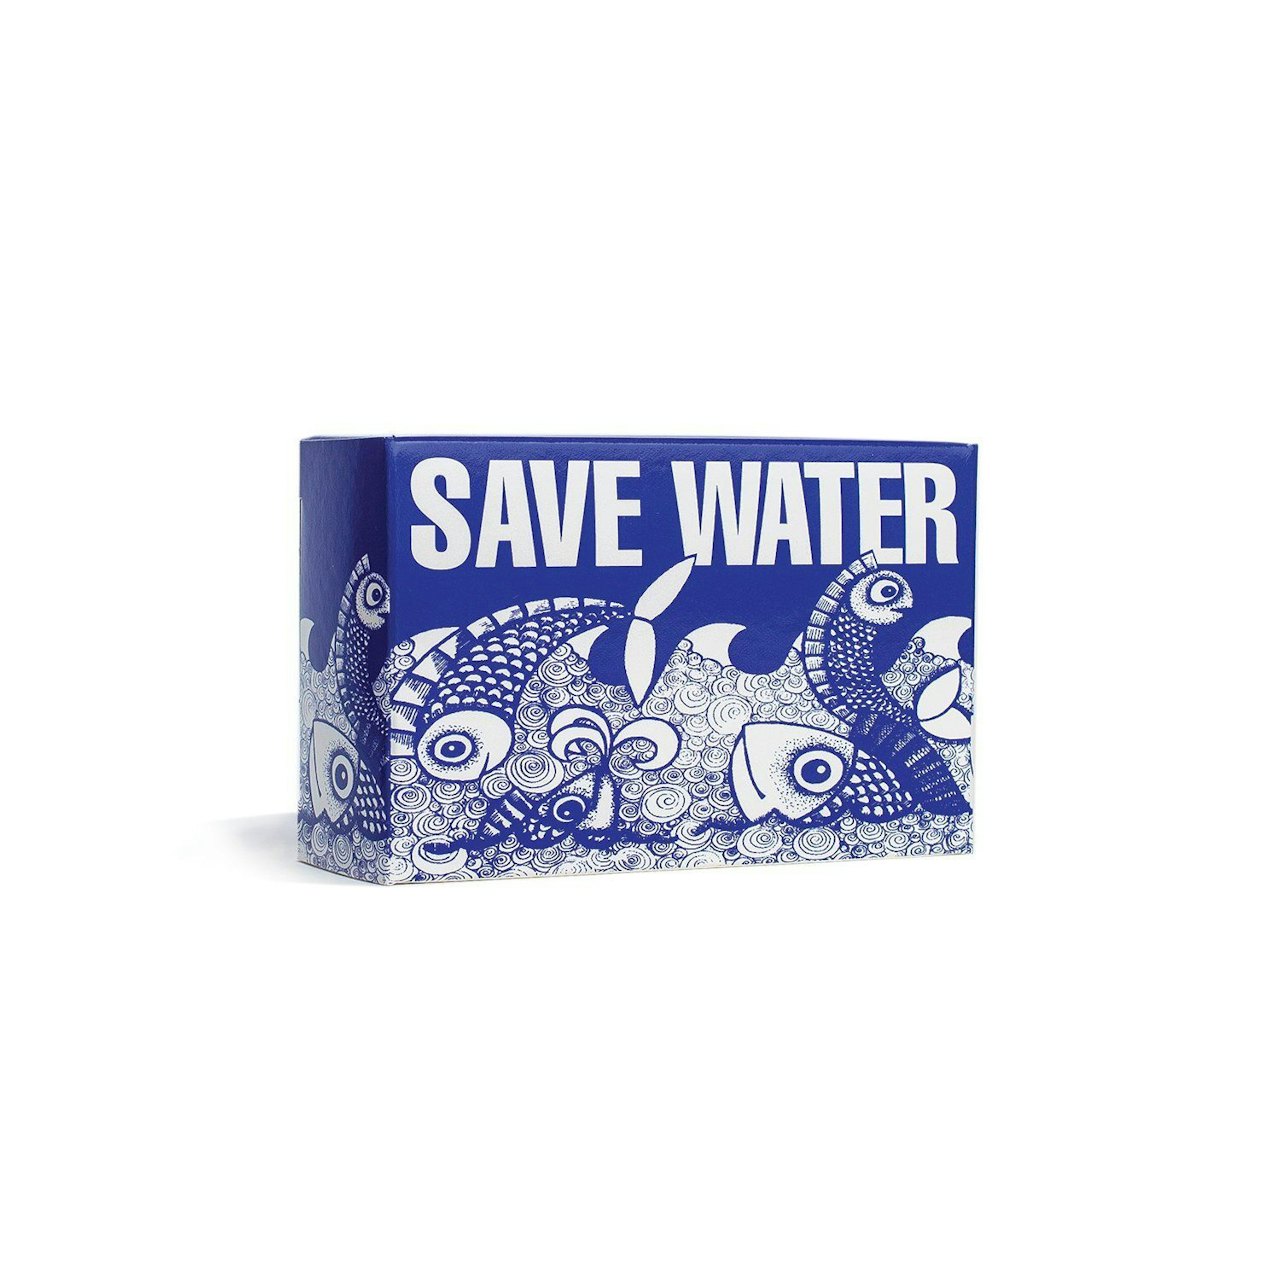 Kalastyle Save Water Soap Up North Surf Club Portland for Conscious by Chloé